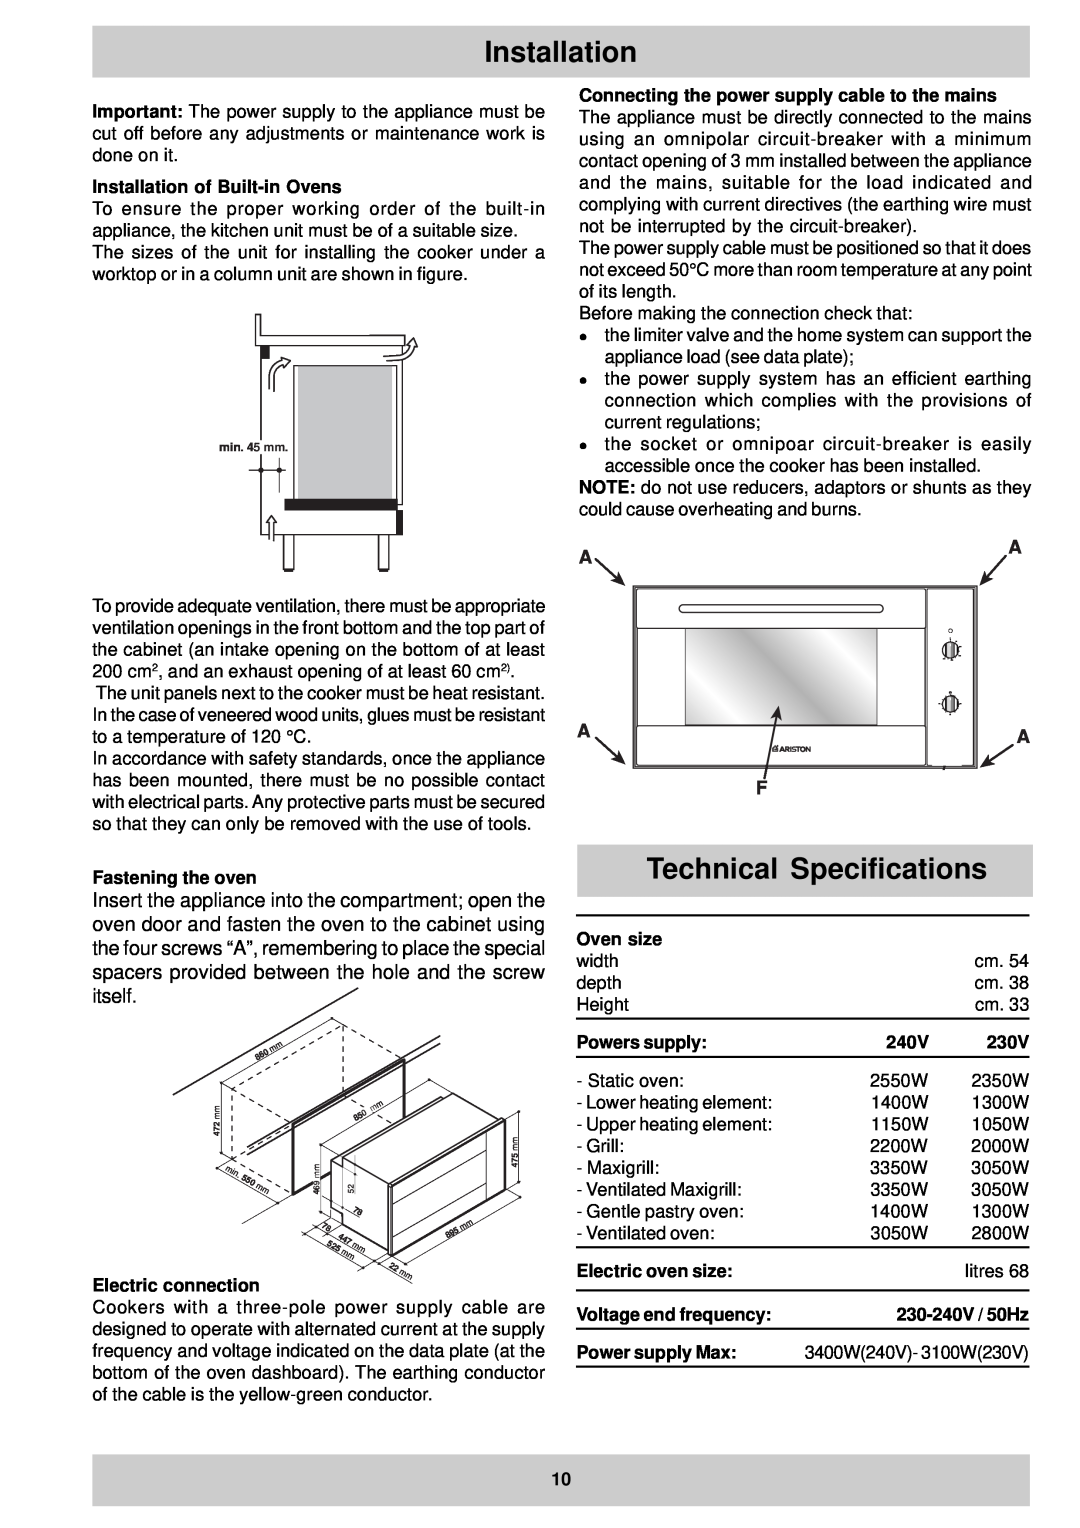 Ariston MB 91 AUS Technical Specifications, Installation of Built-in Ovens, Fastening the oven, Oven size, 240V, 230V 